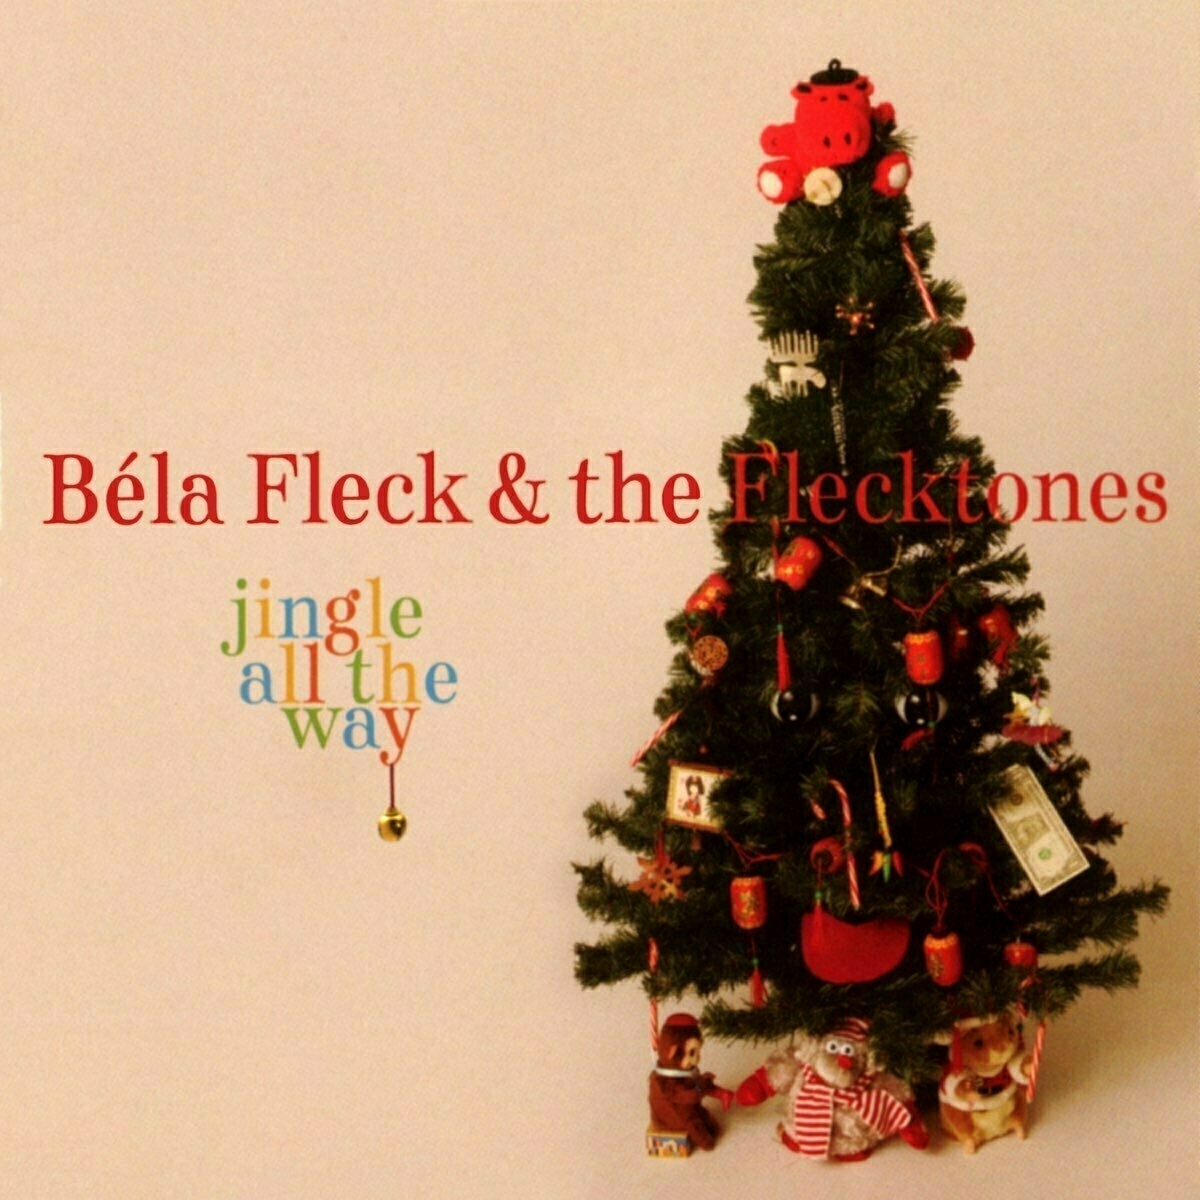 Album cover for 'Jingle All the Way,' a Christmas album by Béla Fleck and the Flecktones